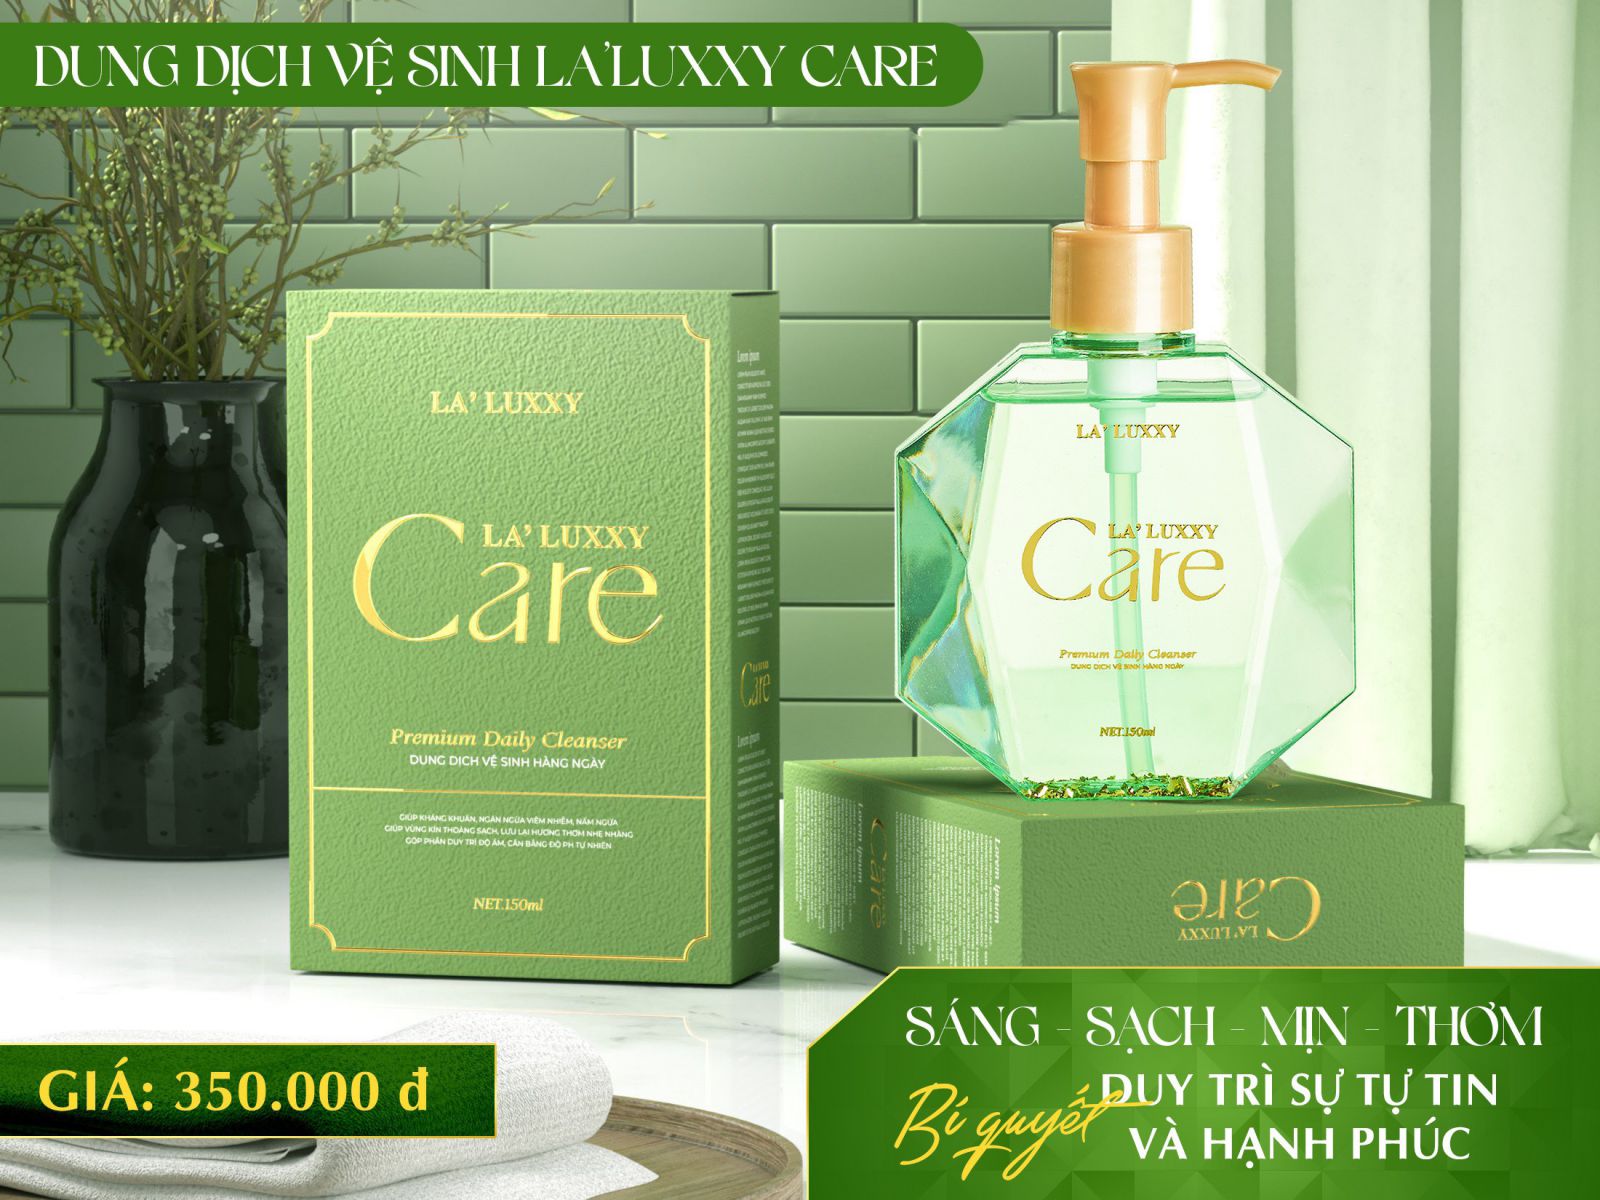 Laluxxy Care Dung dịch vệ sinh